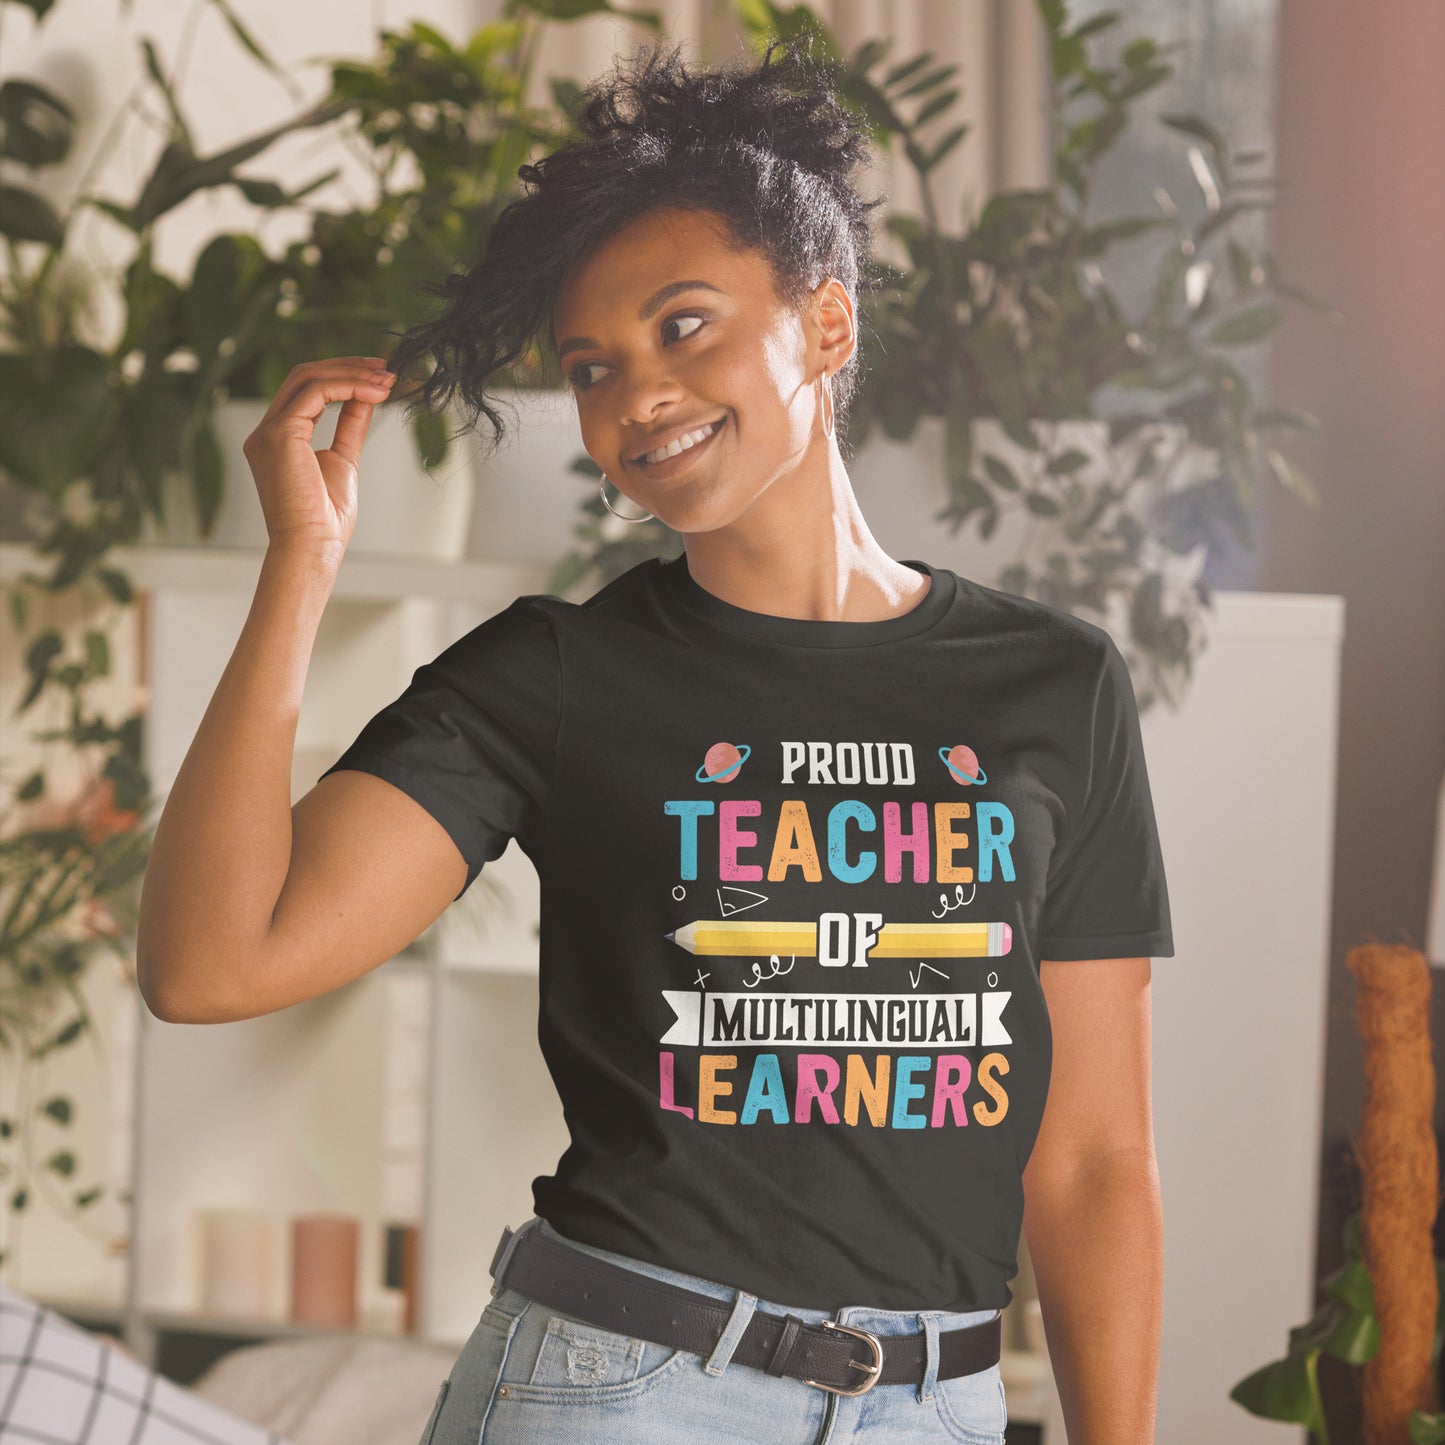 Proud to Teach Multilingual Learners T-Shirt